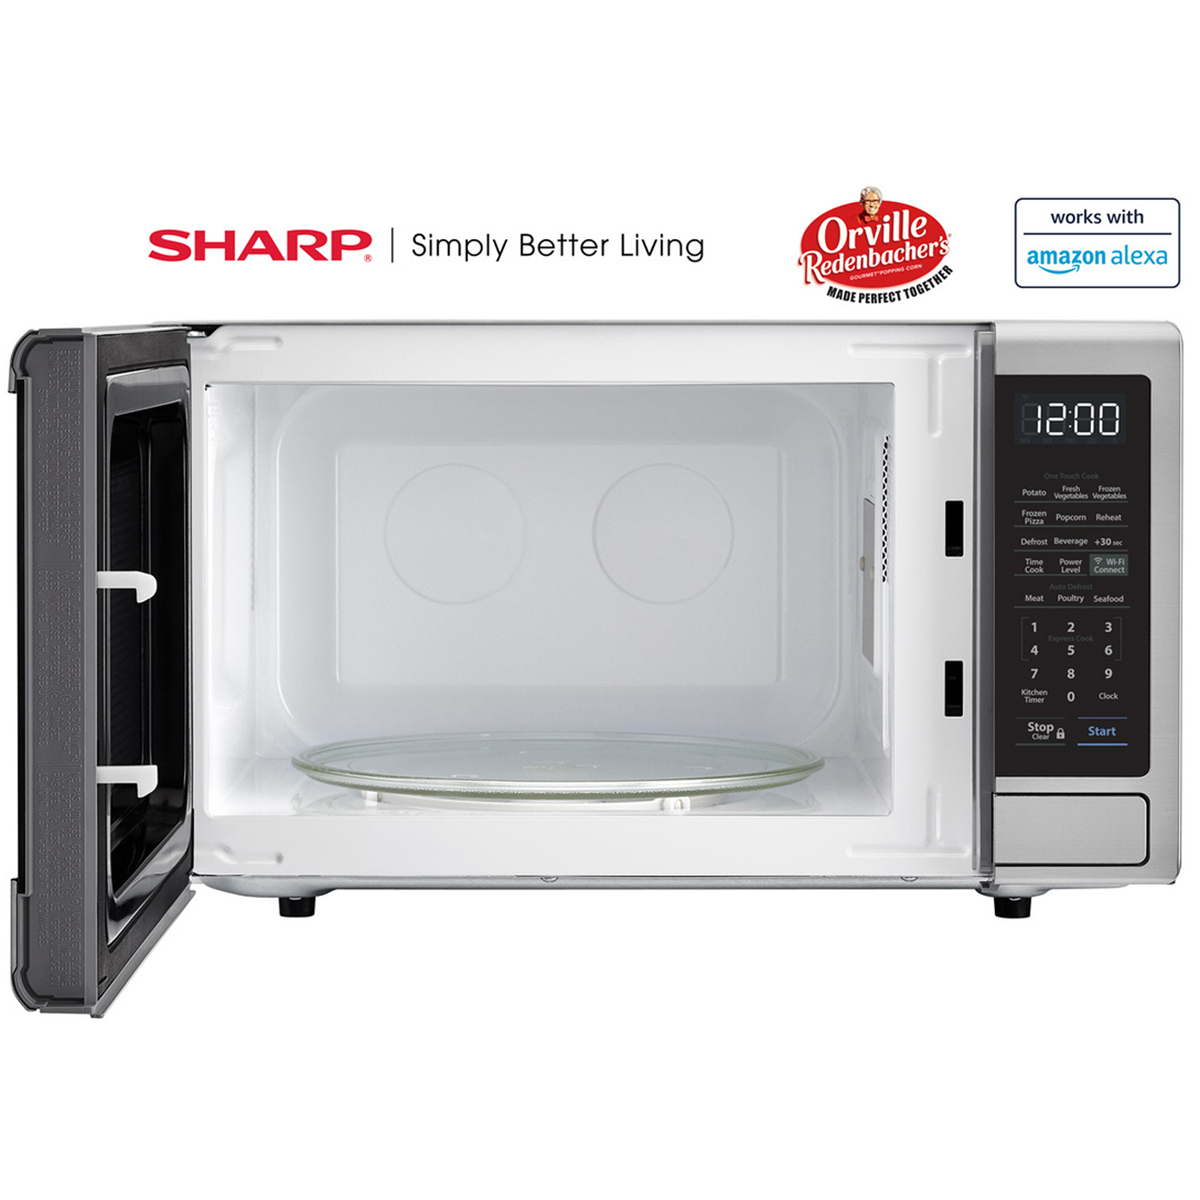 1.1 cu. ft. 1000W Sharp Stainless Steel Smart Carousel Countertop Microwave Oven (SMC1139FS) - image 5 of 10